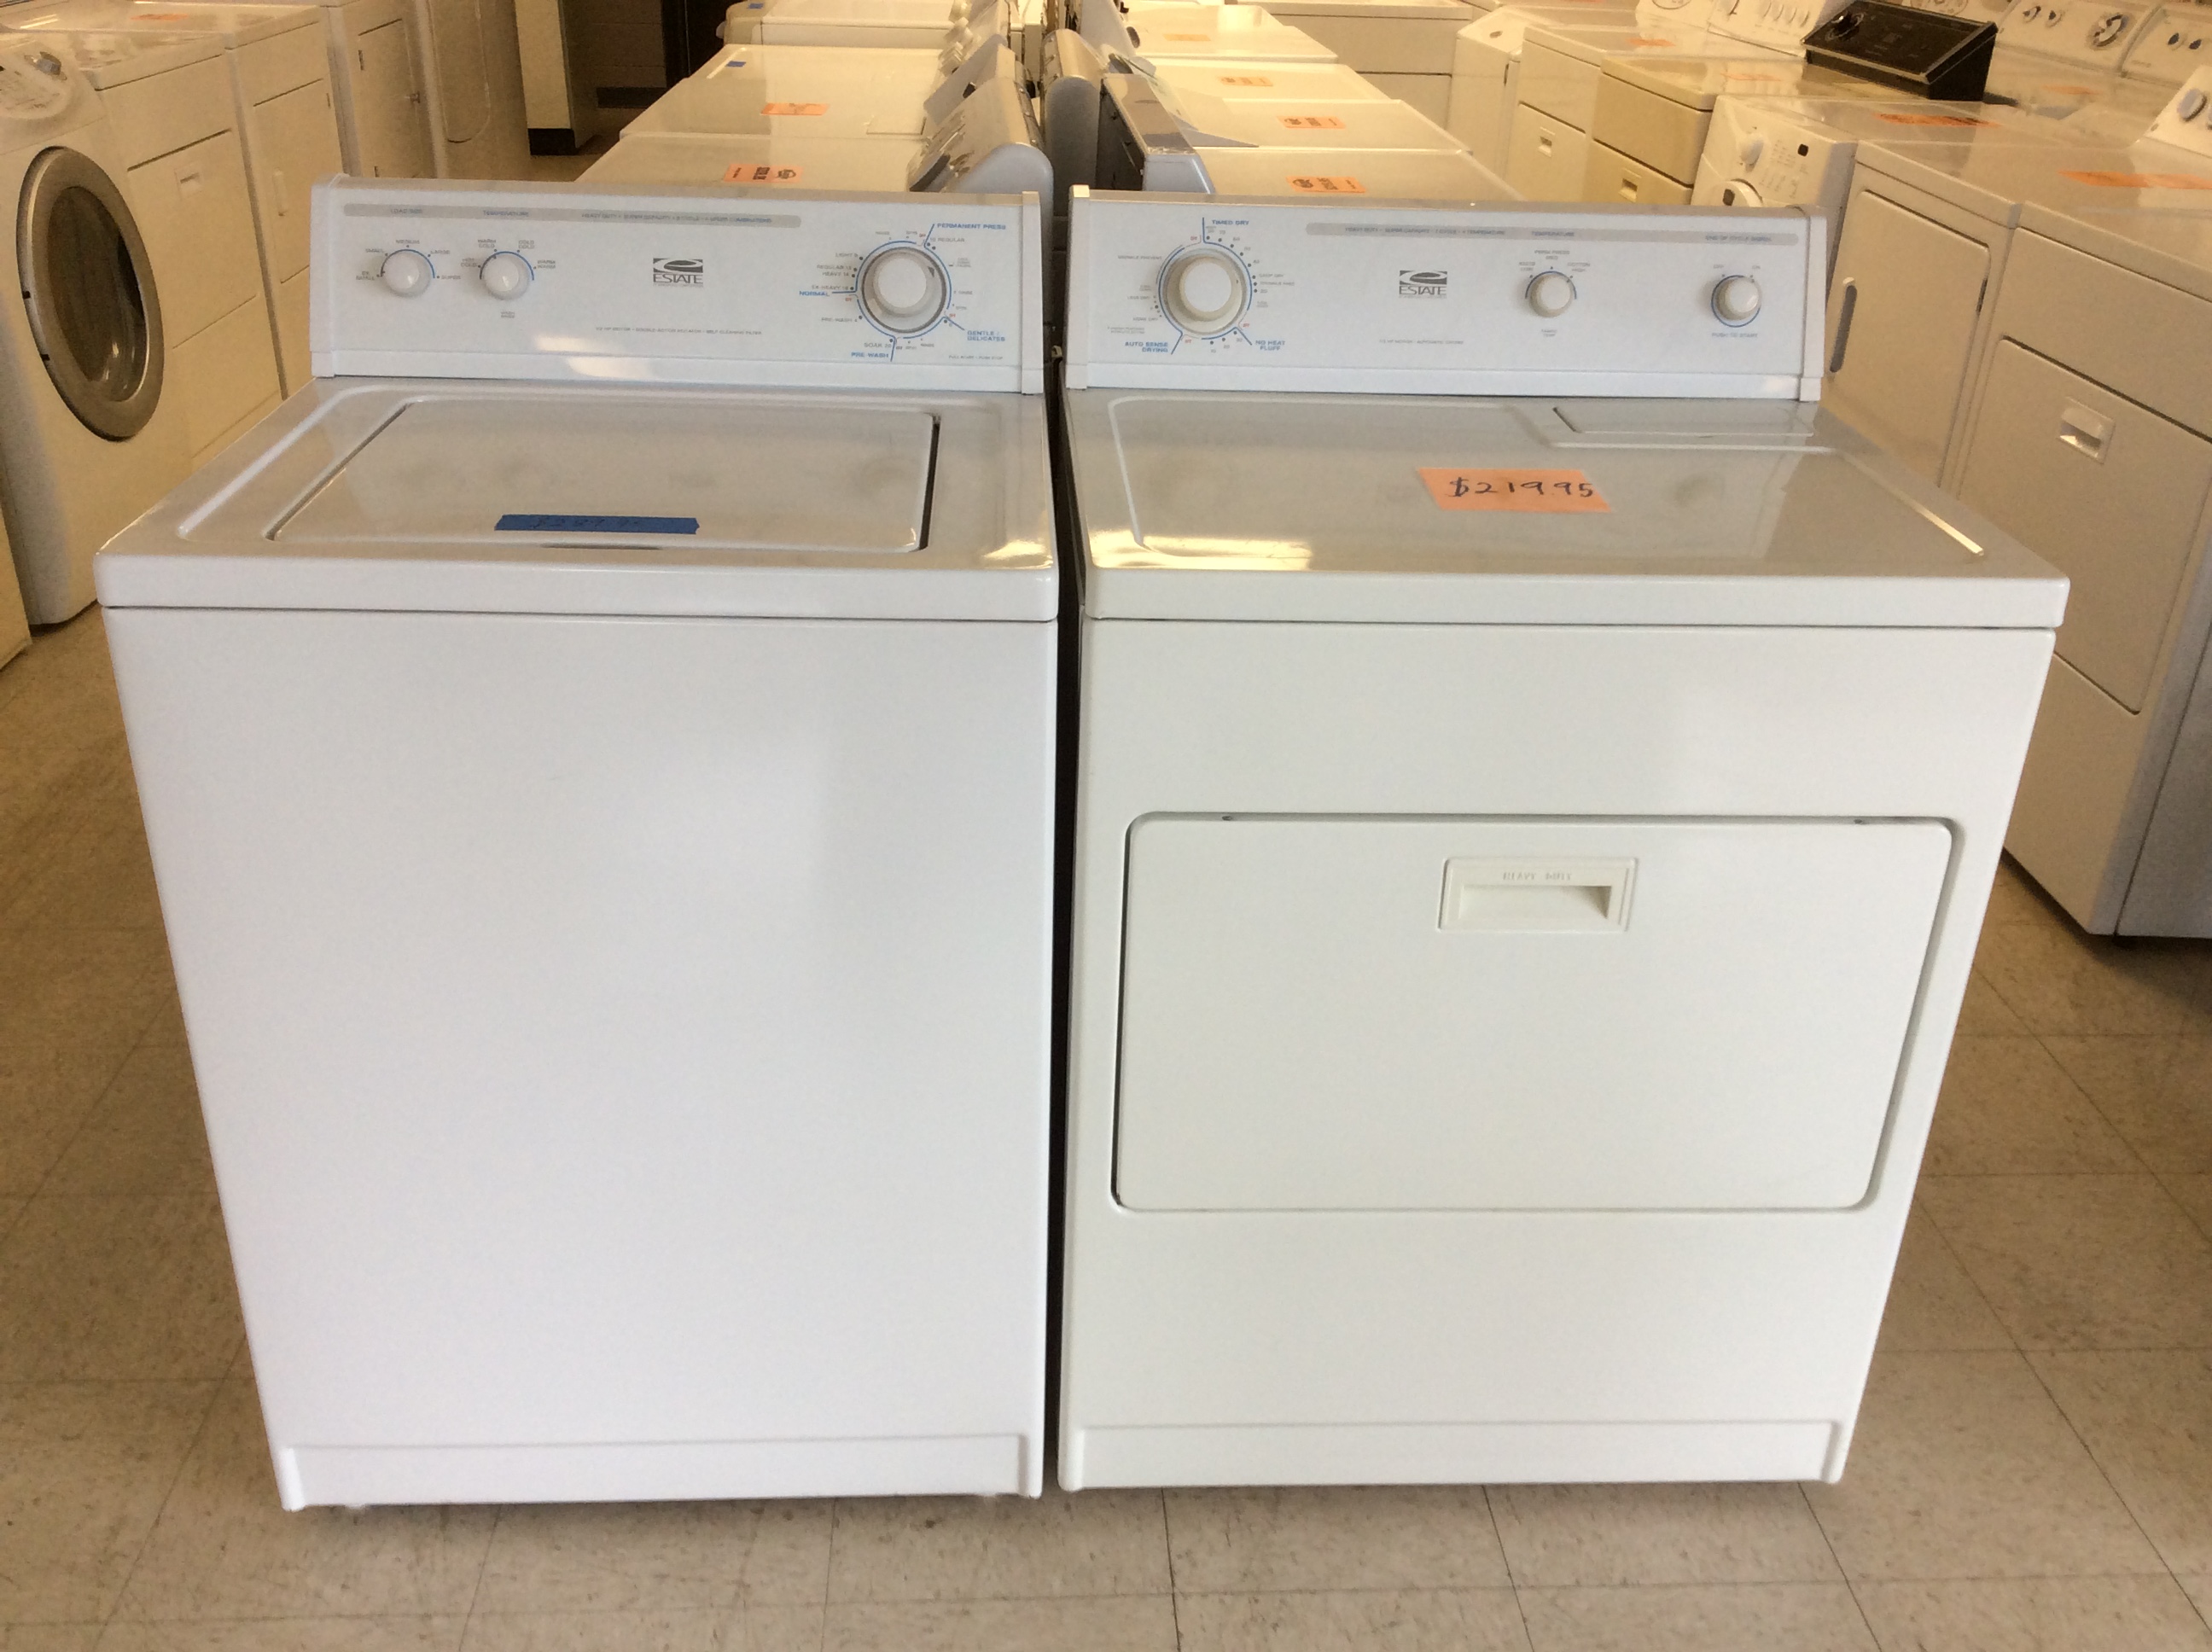 whirlpool-estate-washer-and-electric-dryer-set-kelbachs